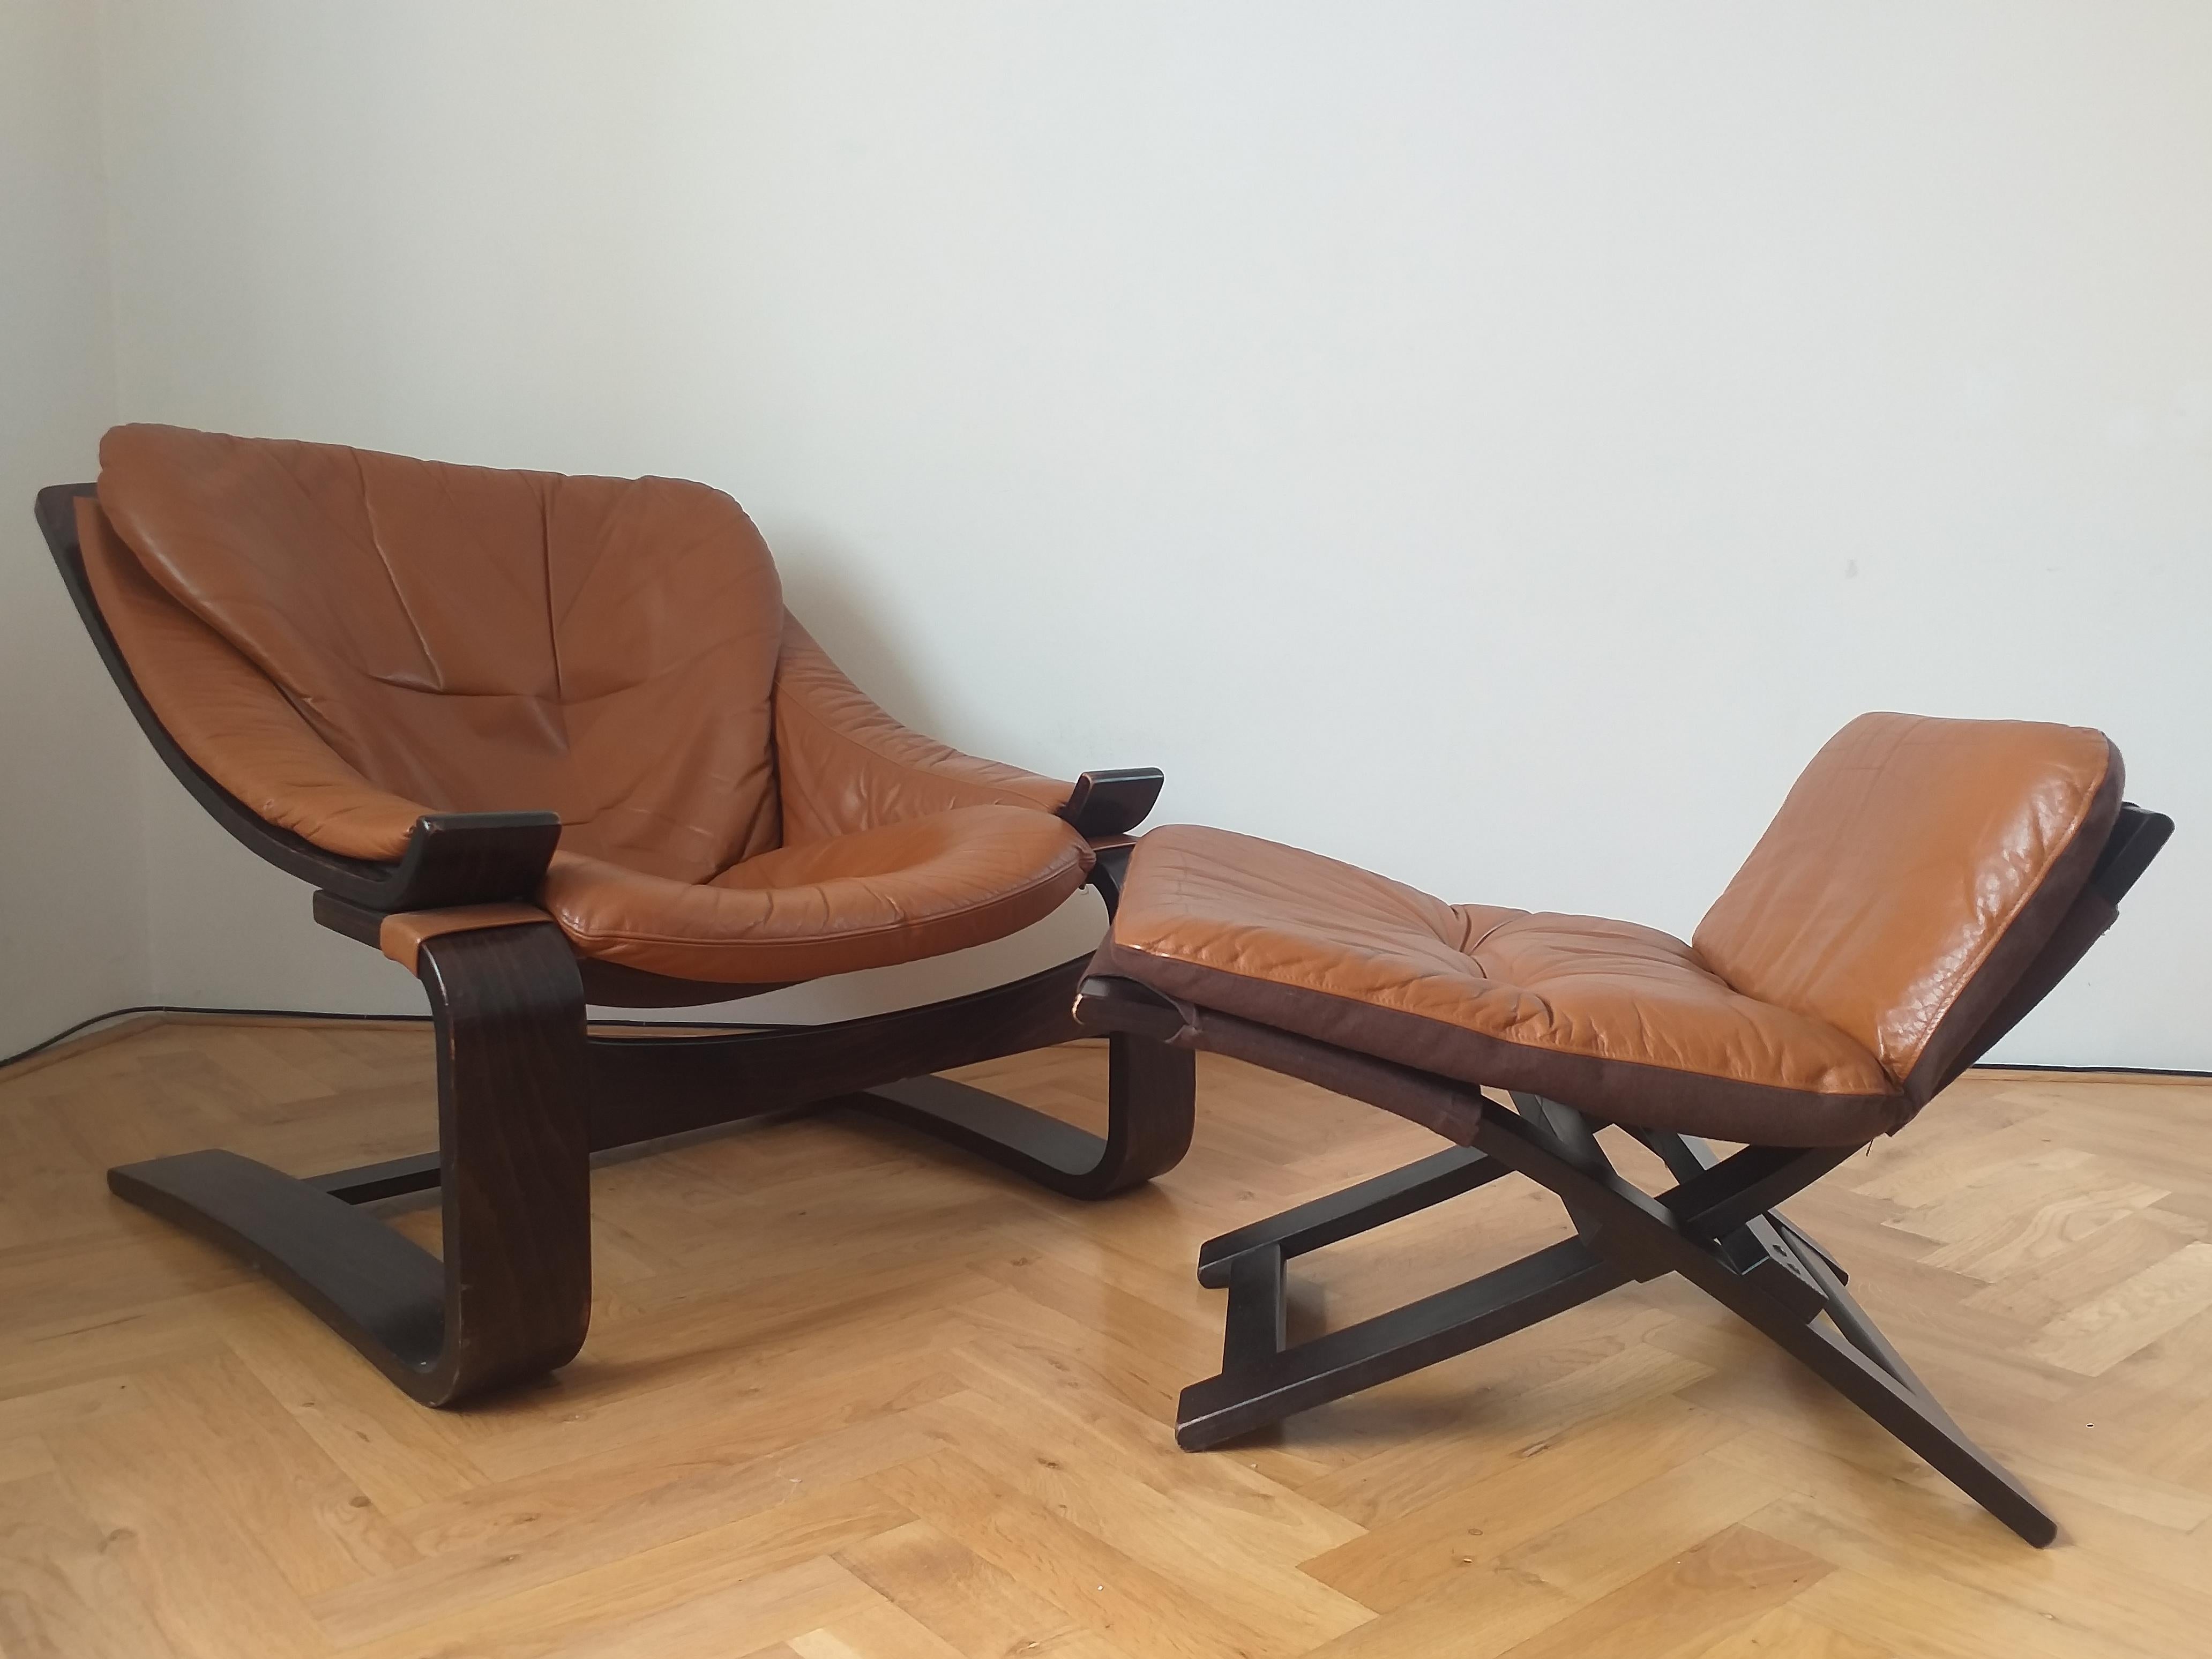 Swedish Midcentury Lounge Chair Kroken with Ottoman, Ake Fribytter, Nelo, Sweden, 1970s For Sale